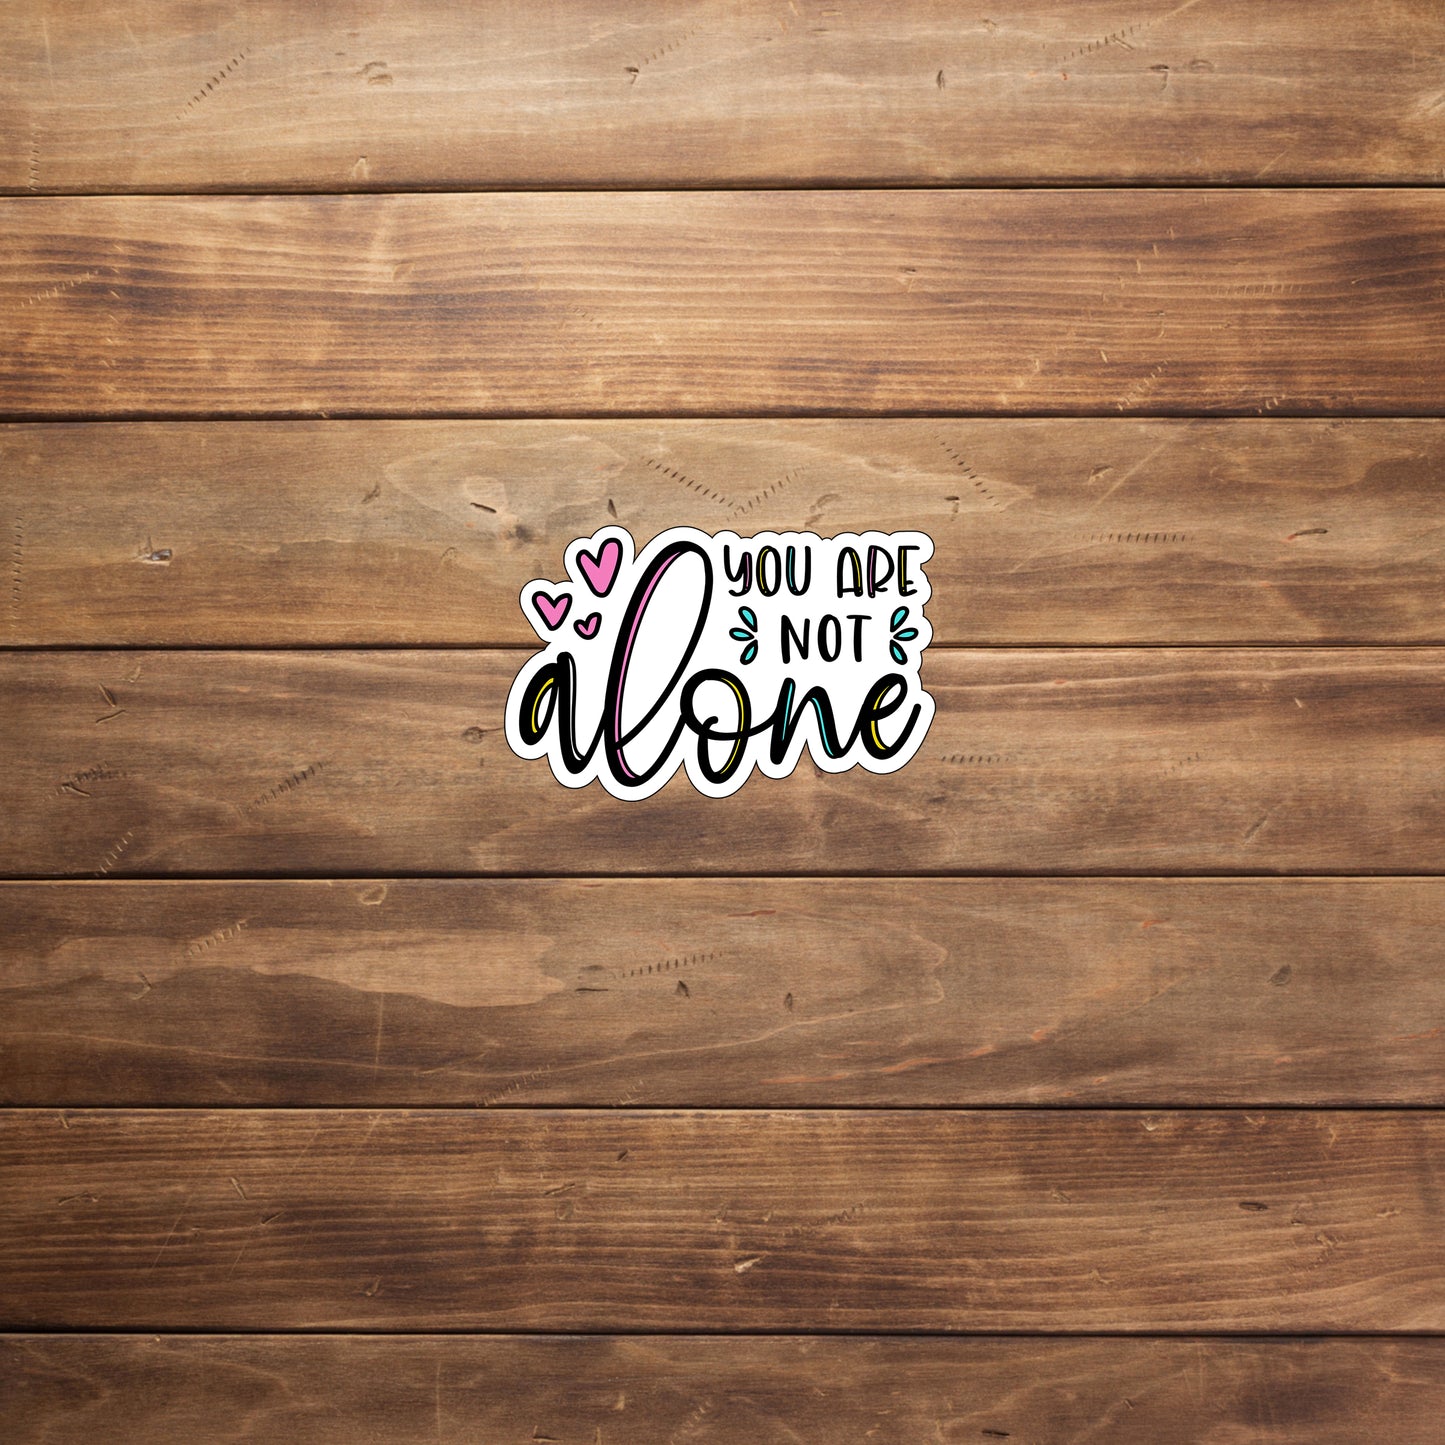 Mental Health you are not alone Stickers